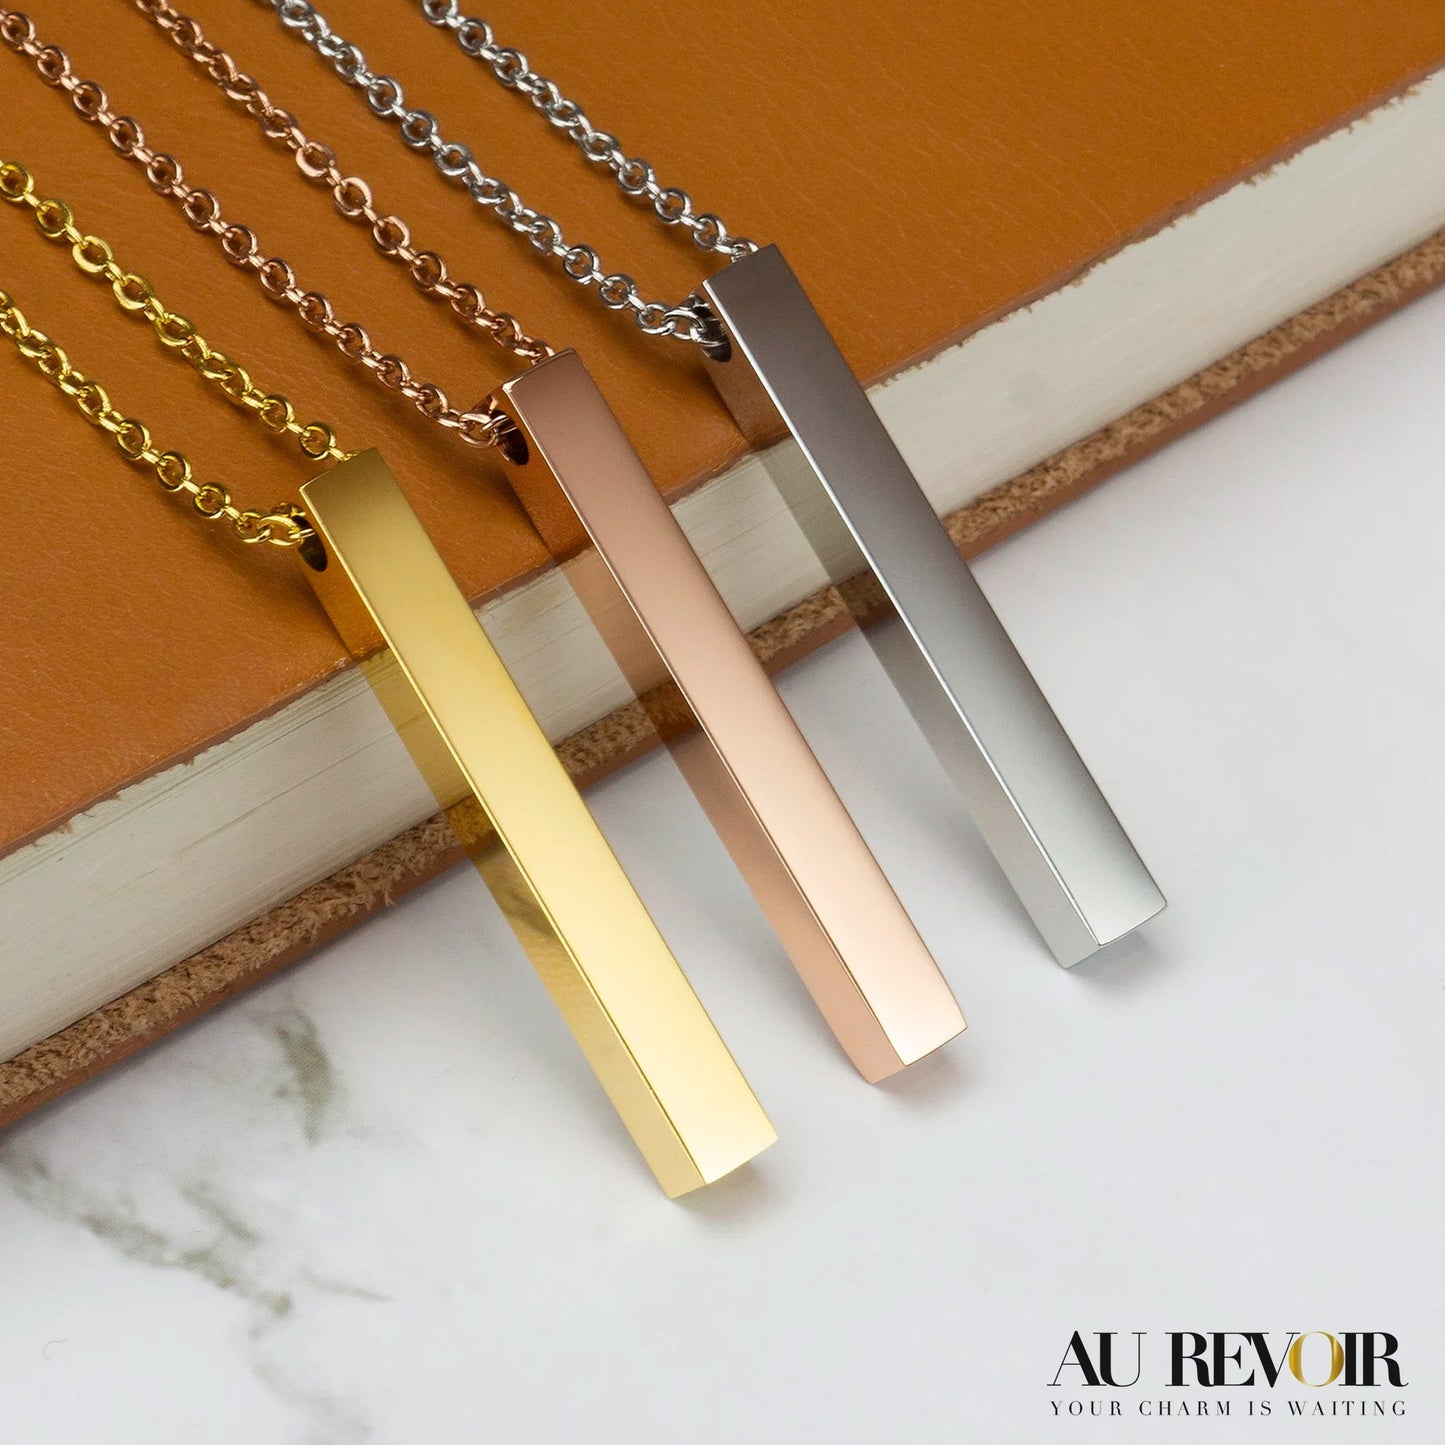 Cuboid pendant rose gold pendant with chain gold pendant with chain black pendant with chain beautiful necklace stainless steel jewelry trending wearable  product 